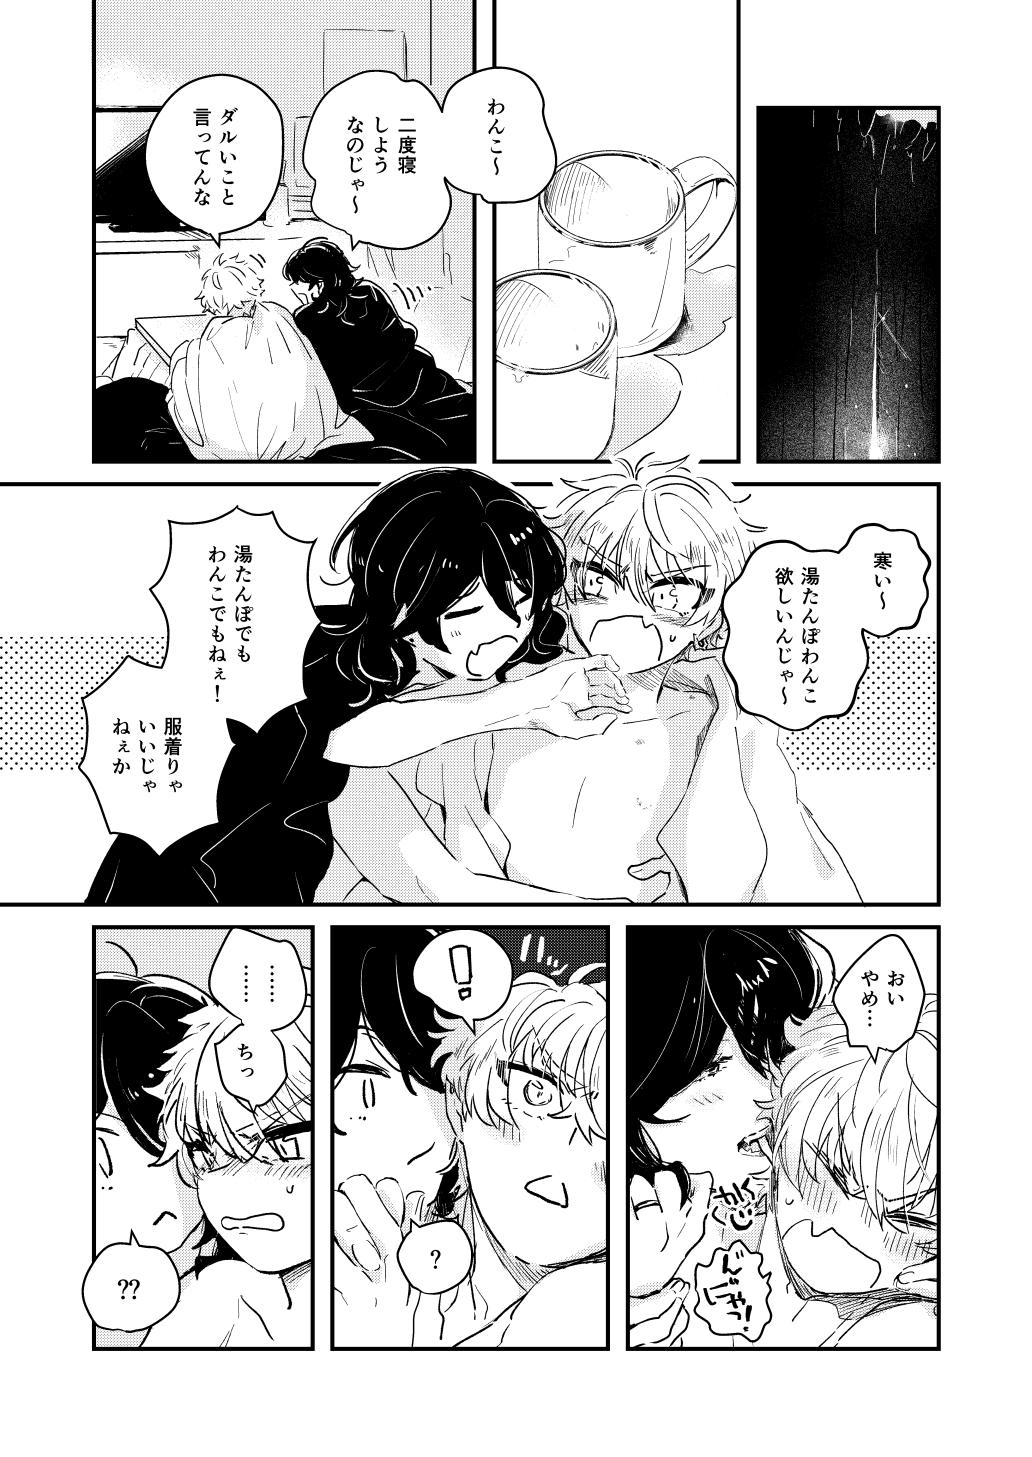 Online morning engage - Ensemble stars Reversecowgirl - Page 5